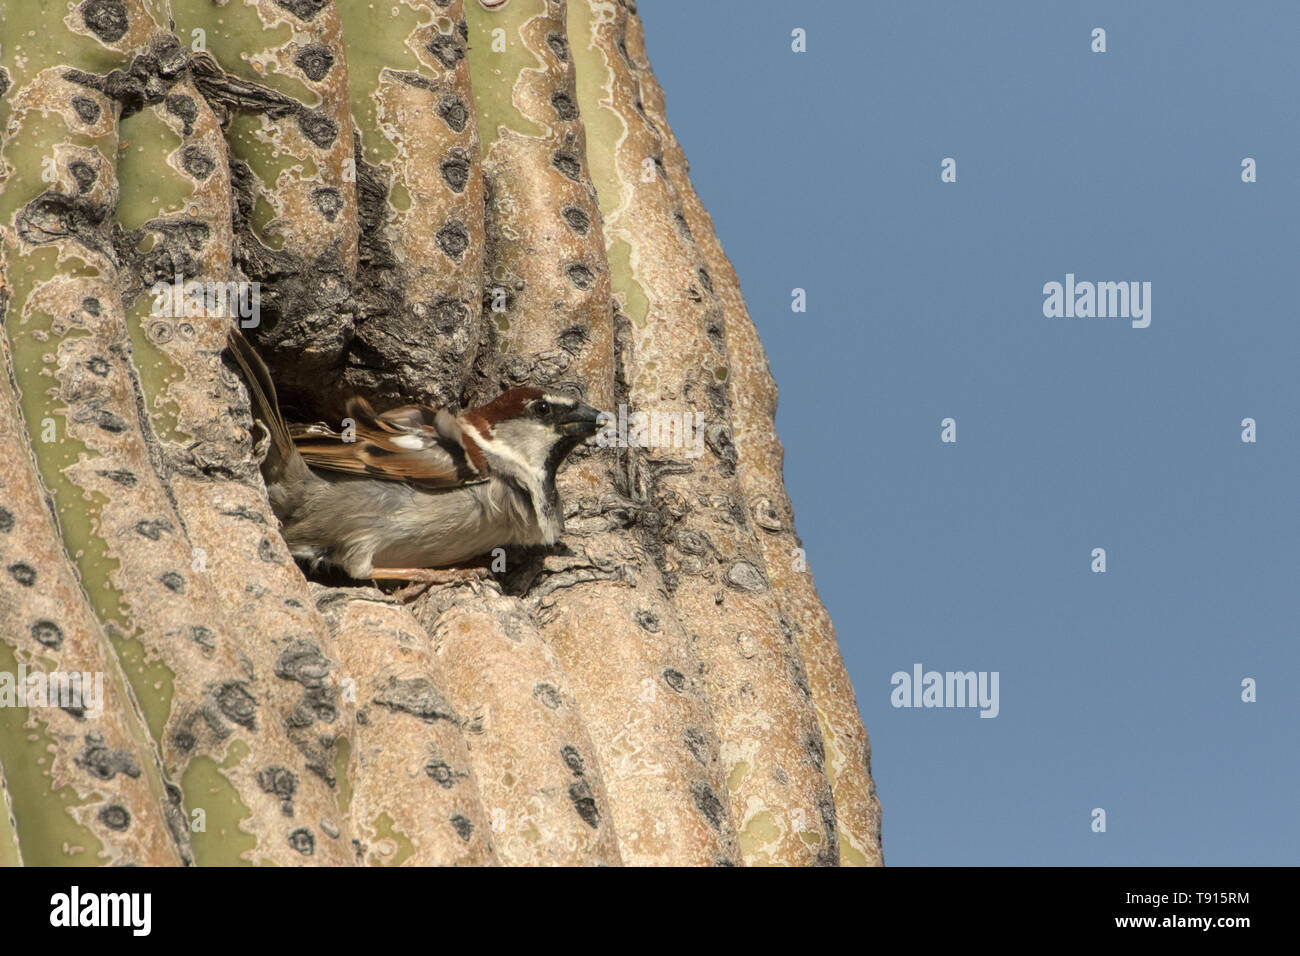 house sparrow (Passer domesticus), male, at nest in saguaro cactus, Sonoran desert Arizona, a species introduced to North America from Eurasia, has be Stock Photo